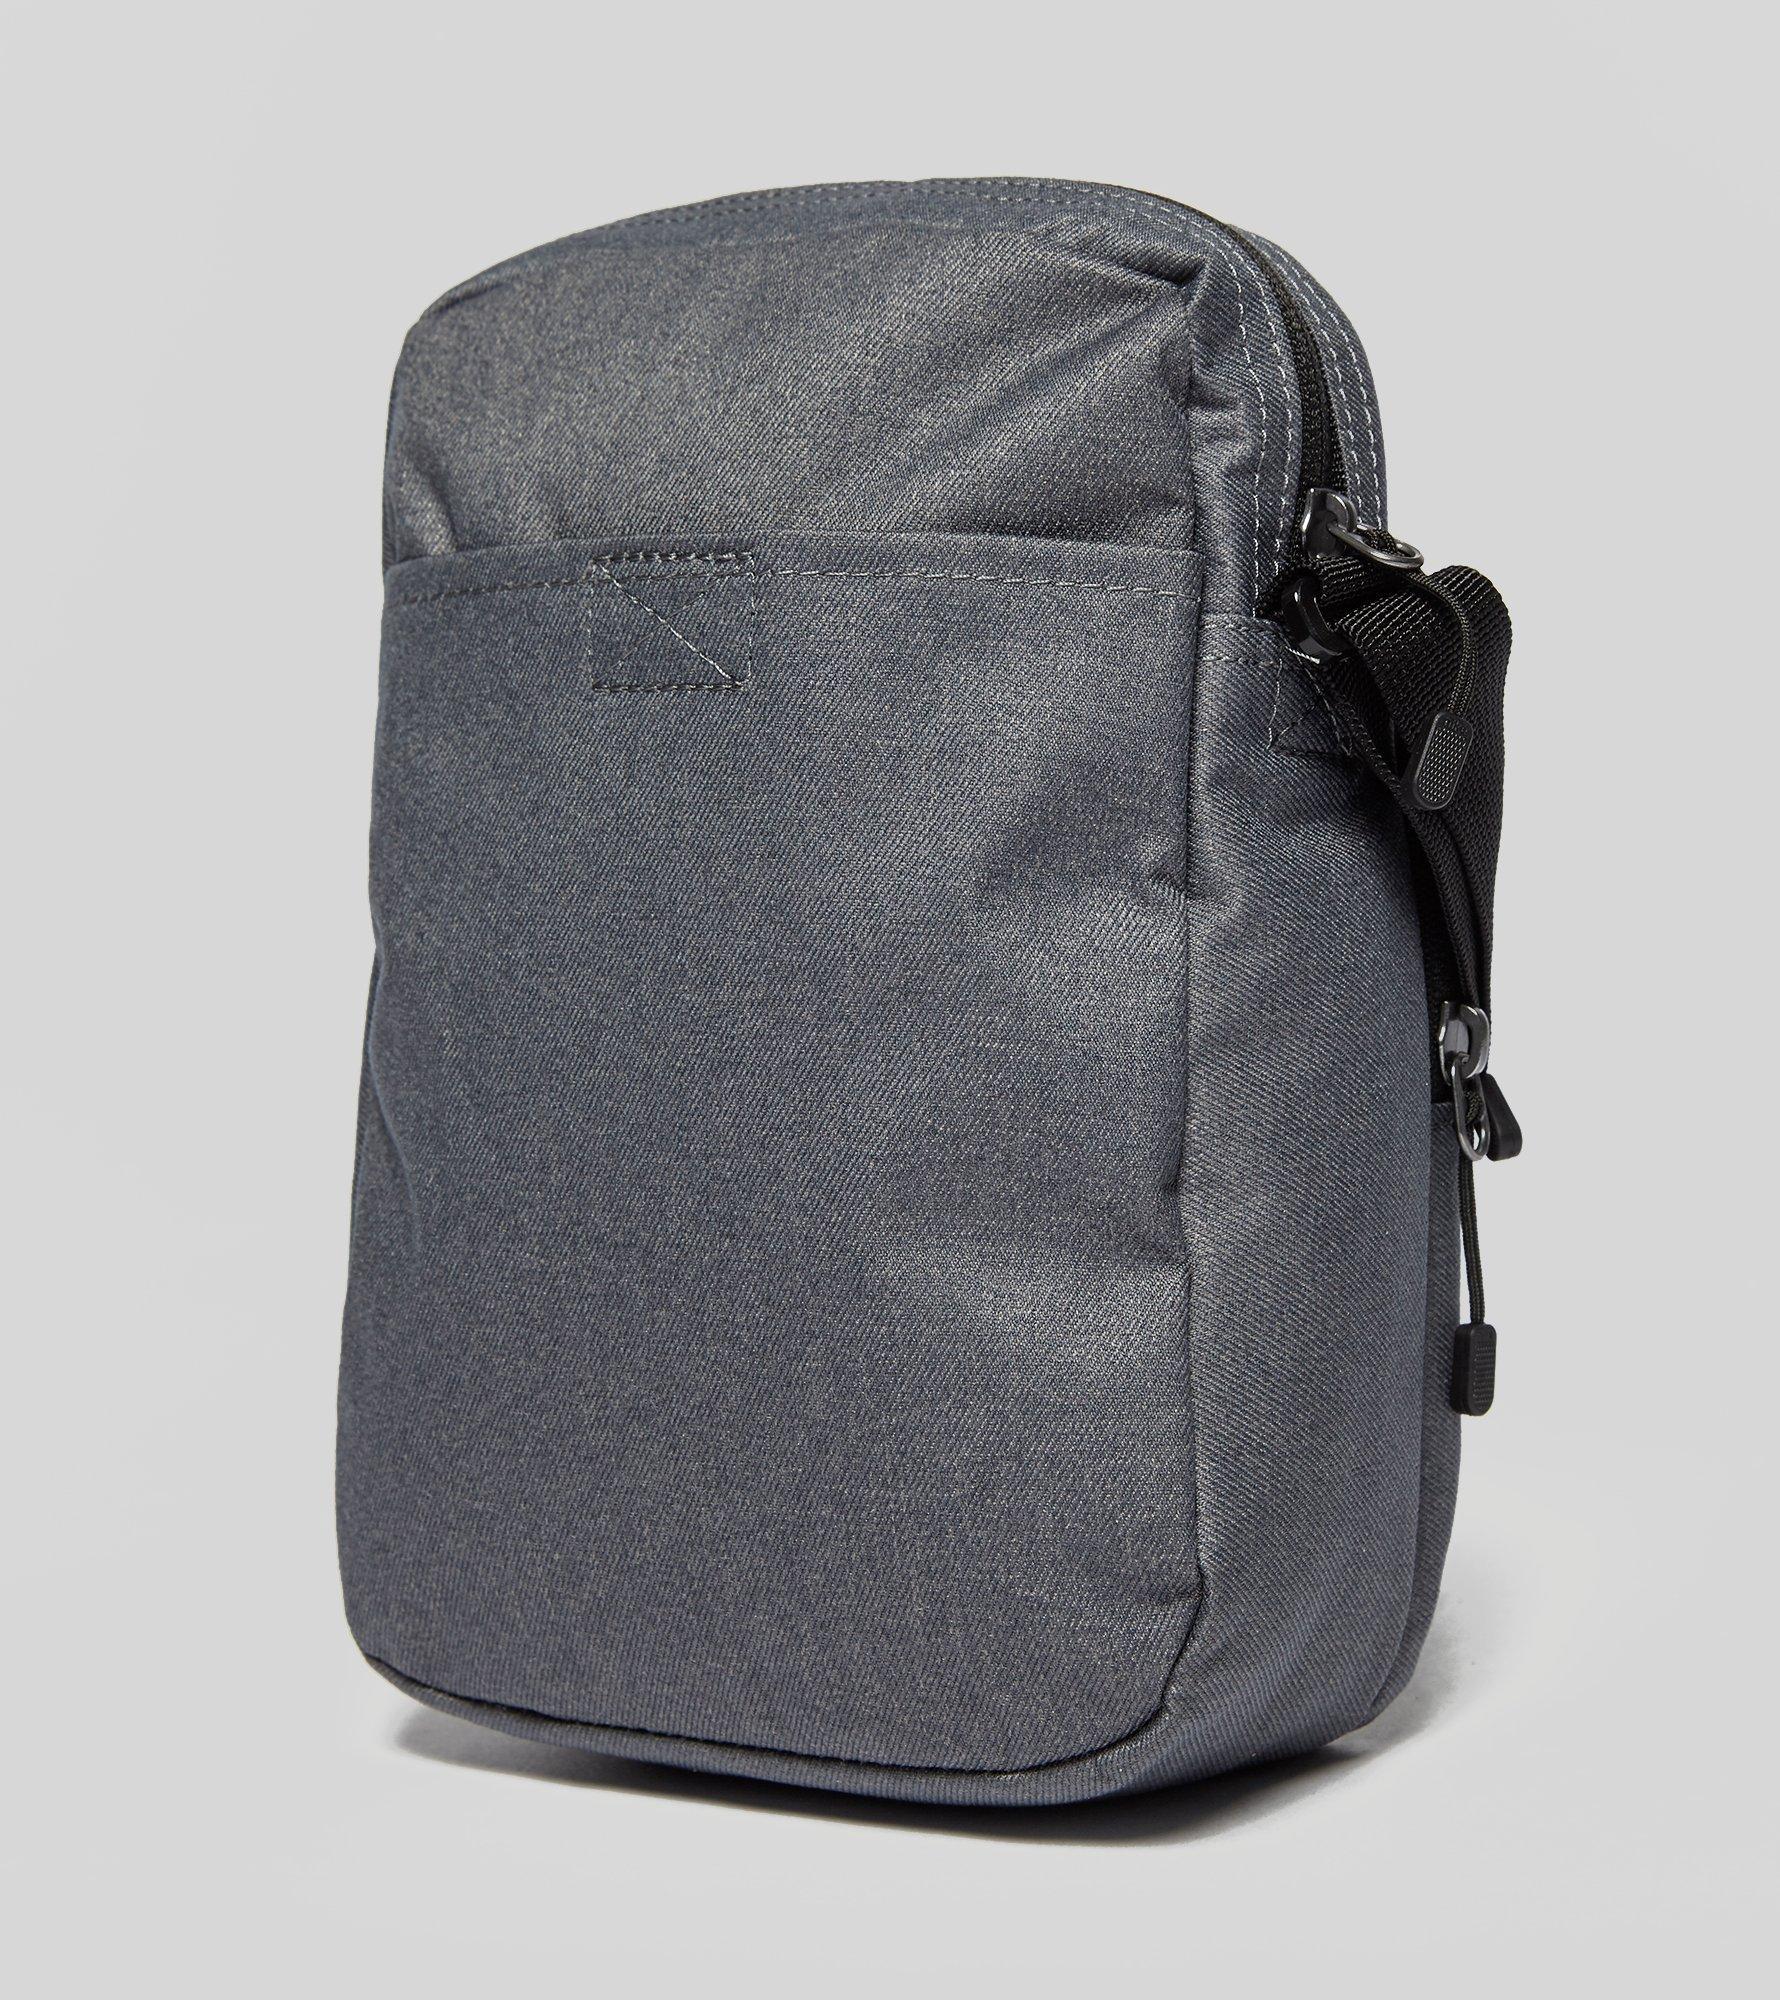 Nike Core Small Crossbody Bag in Gray for Men - Lyst